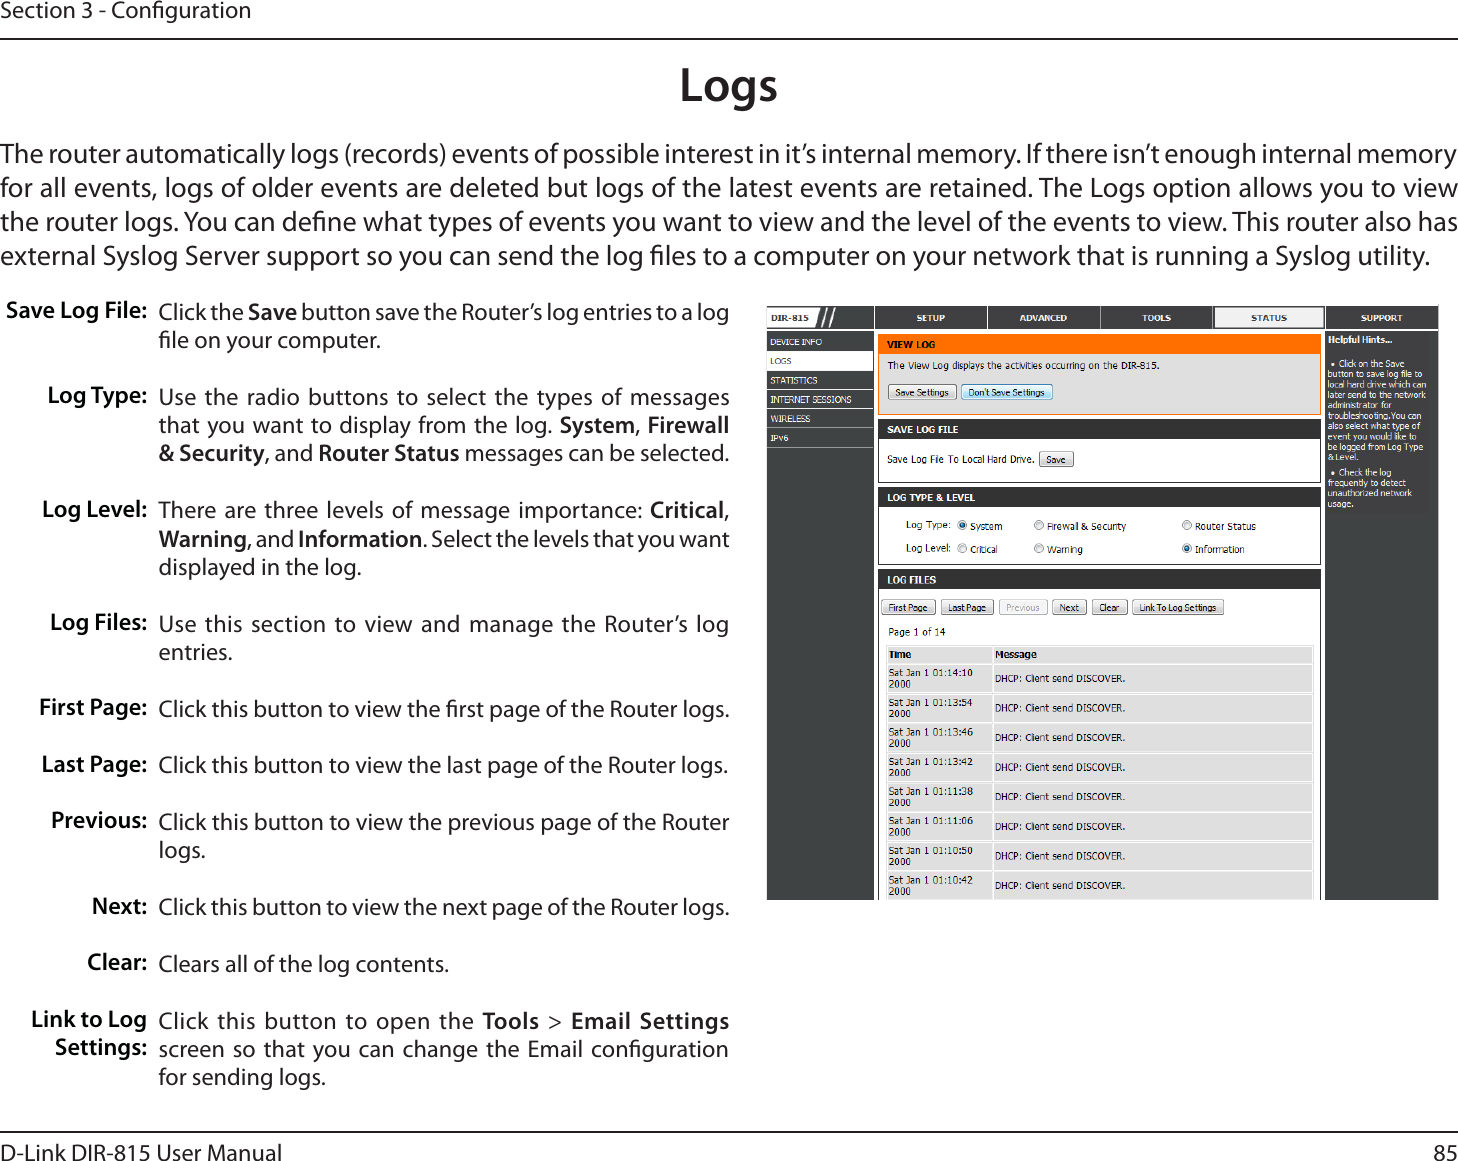 85D-Link DIR-815 User ManualSection 3 - CongurationLogsSave Log File:Log Type:Log Level:Log Files:First Page:Last Page:Previous:/FYUClear:Link to Log Settings:Click the Save button save the Router’s log entries to a log le on your computer.Use the radio buttons to select the types of messages that you want to display from the log. System, Firewall &amp; Security, and Router Status messages can be selected.There are three levels of message importance: Critical, Warning, and Information. Select the levels that you want displayed in the log.Use this section to view and manage the Router’s log entries.Click this button to view the rst page of the Router logs.Click this button to view the last page of the Router logs. Click this button to view the previous page of the Router logs.Click this button to view the next page of the Router logs. Clears all of the log contents.Click this button to open the Tools &gt; Email Settings screen so that you can change the Email conguration for sending logs.The router automatically logs (records) events of possible interest in it’s internal memory. If there isn’t enough internal memory for all events, logs of older events are deleted but logs of the latest events are retained. The Logs option allows you to view UIFSPVUFSMPHT:PVDBOEFöOFXIBUUZQFTPGFWFOUTZPVXBOUUPWJFXBOEUIFMFWFMPGUIFFWFOUTUPWJFX5IJTSPVUFSBMTPIBTexternal Syslog Server support so you can send the log les to a computer on your network that is running a Syslog utility.